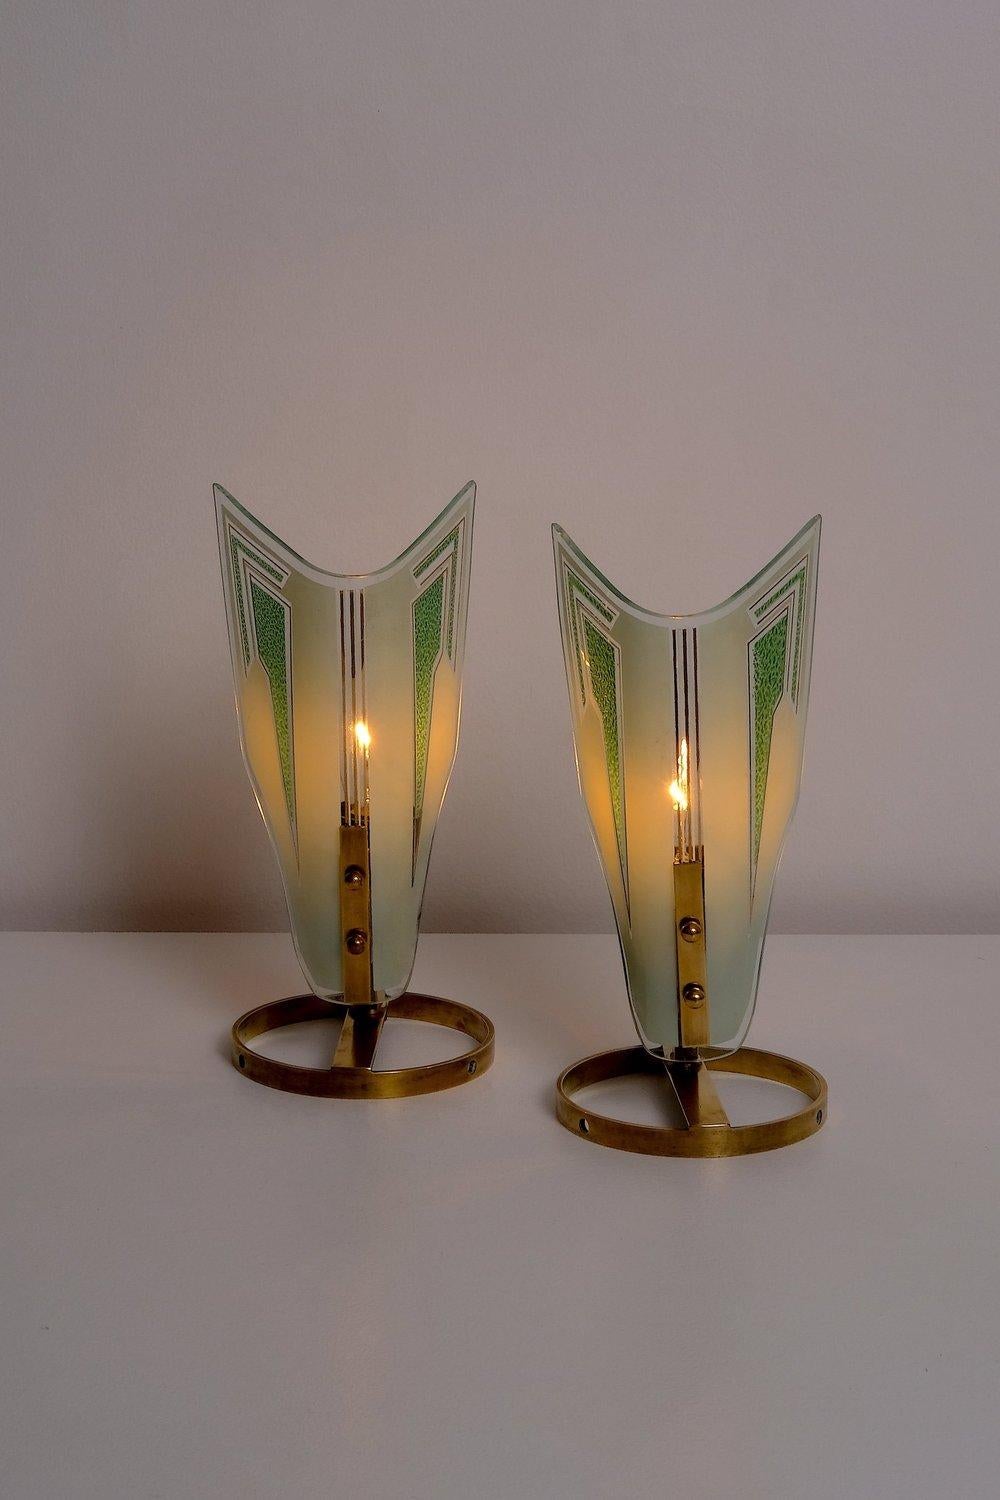 Art Deco style Mid Century table lamps made in Italy in the 1950’s. Etched glass on brass body. 20 to 40 watt E-14 (European bulb) or higher if LED/CFL.
 